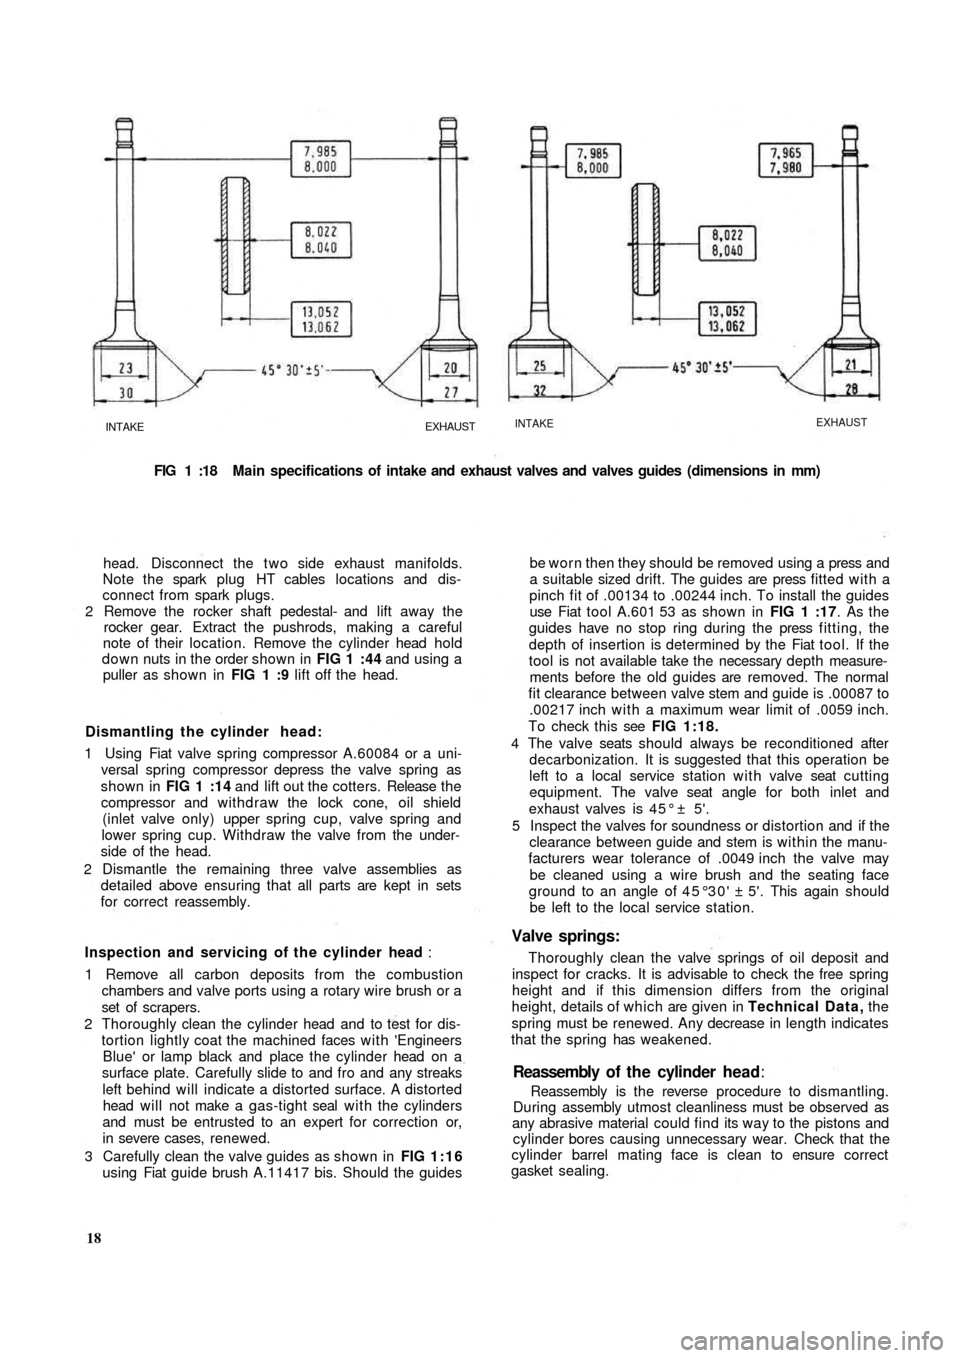 FIAT 500 1969 1.G User Guide INTAKEEXHAUSTINTAKEEXHAUST
FIG 1 :18  Main specifications of intake and exhaust valves and valves guides (dimensions in  mm)
head. Disconnect the t w o side exhaust manifolds.
Note the spark  plug  HT